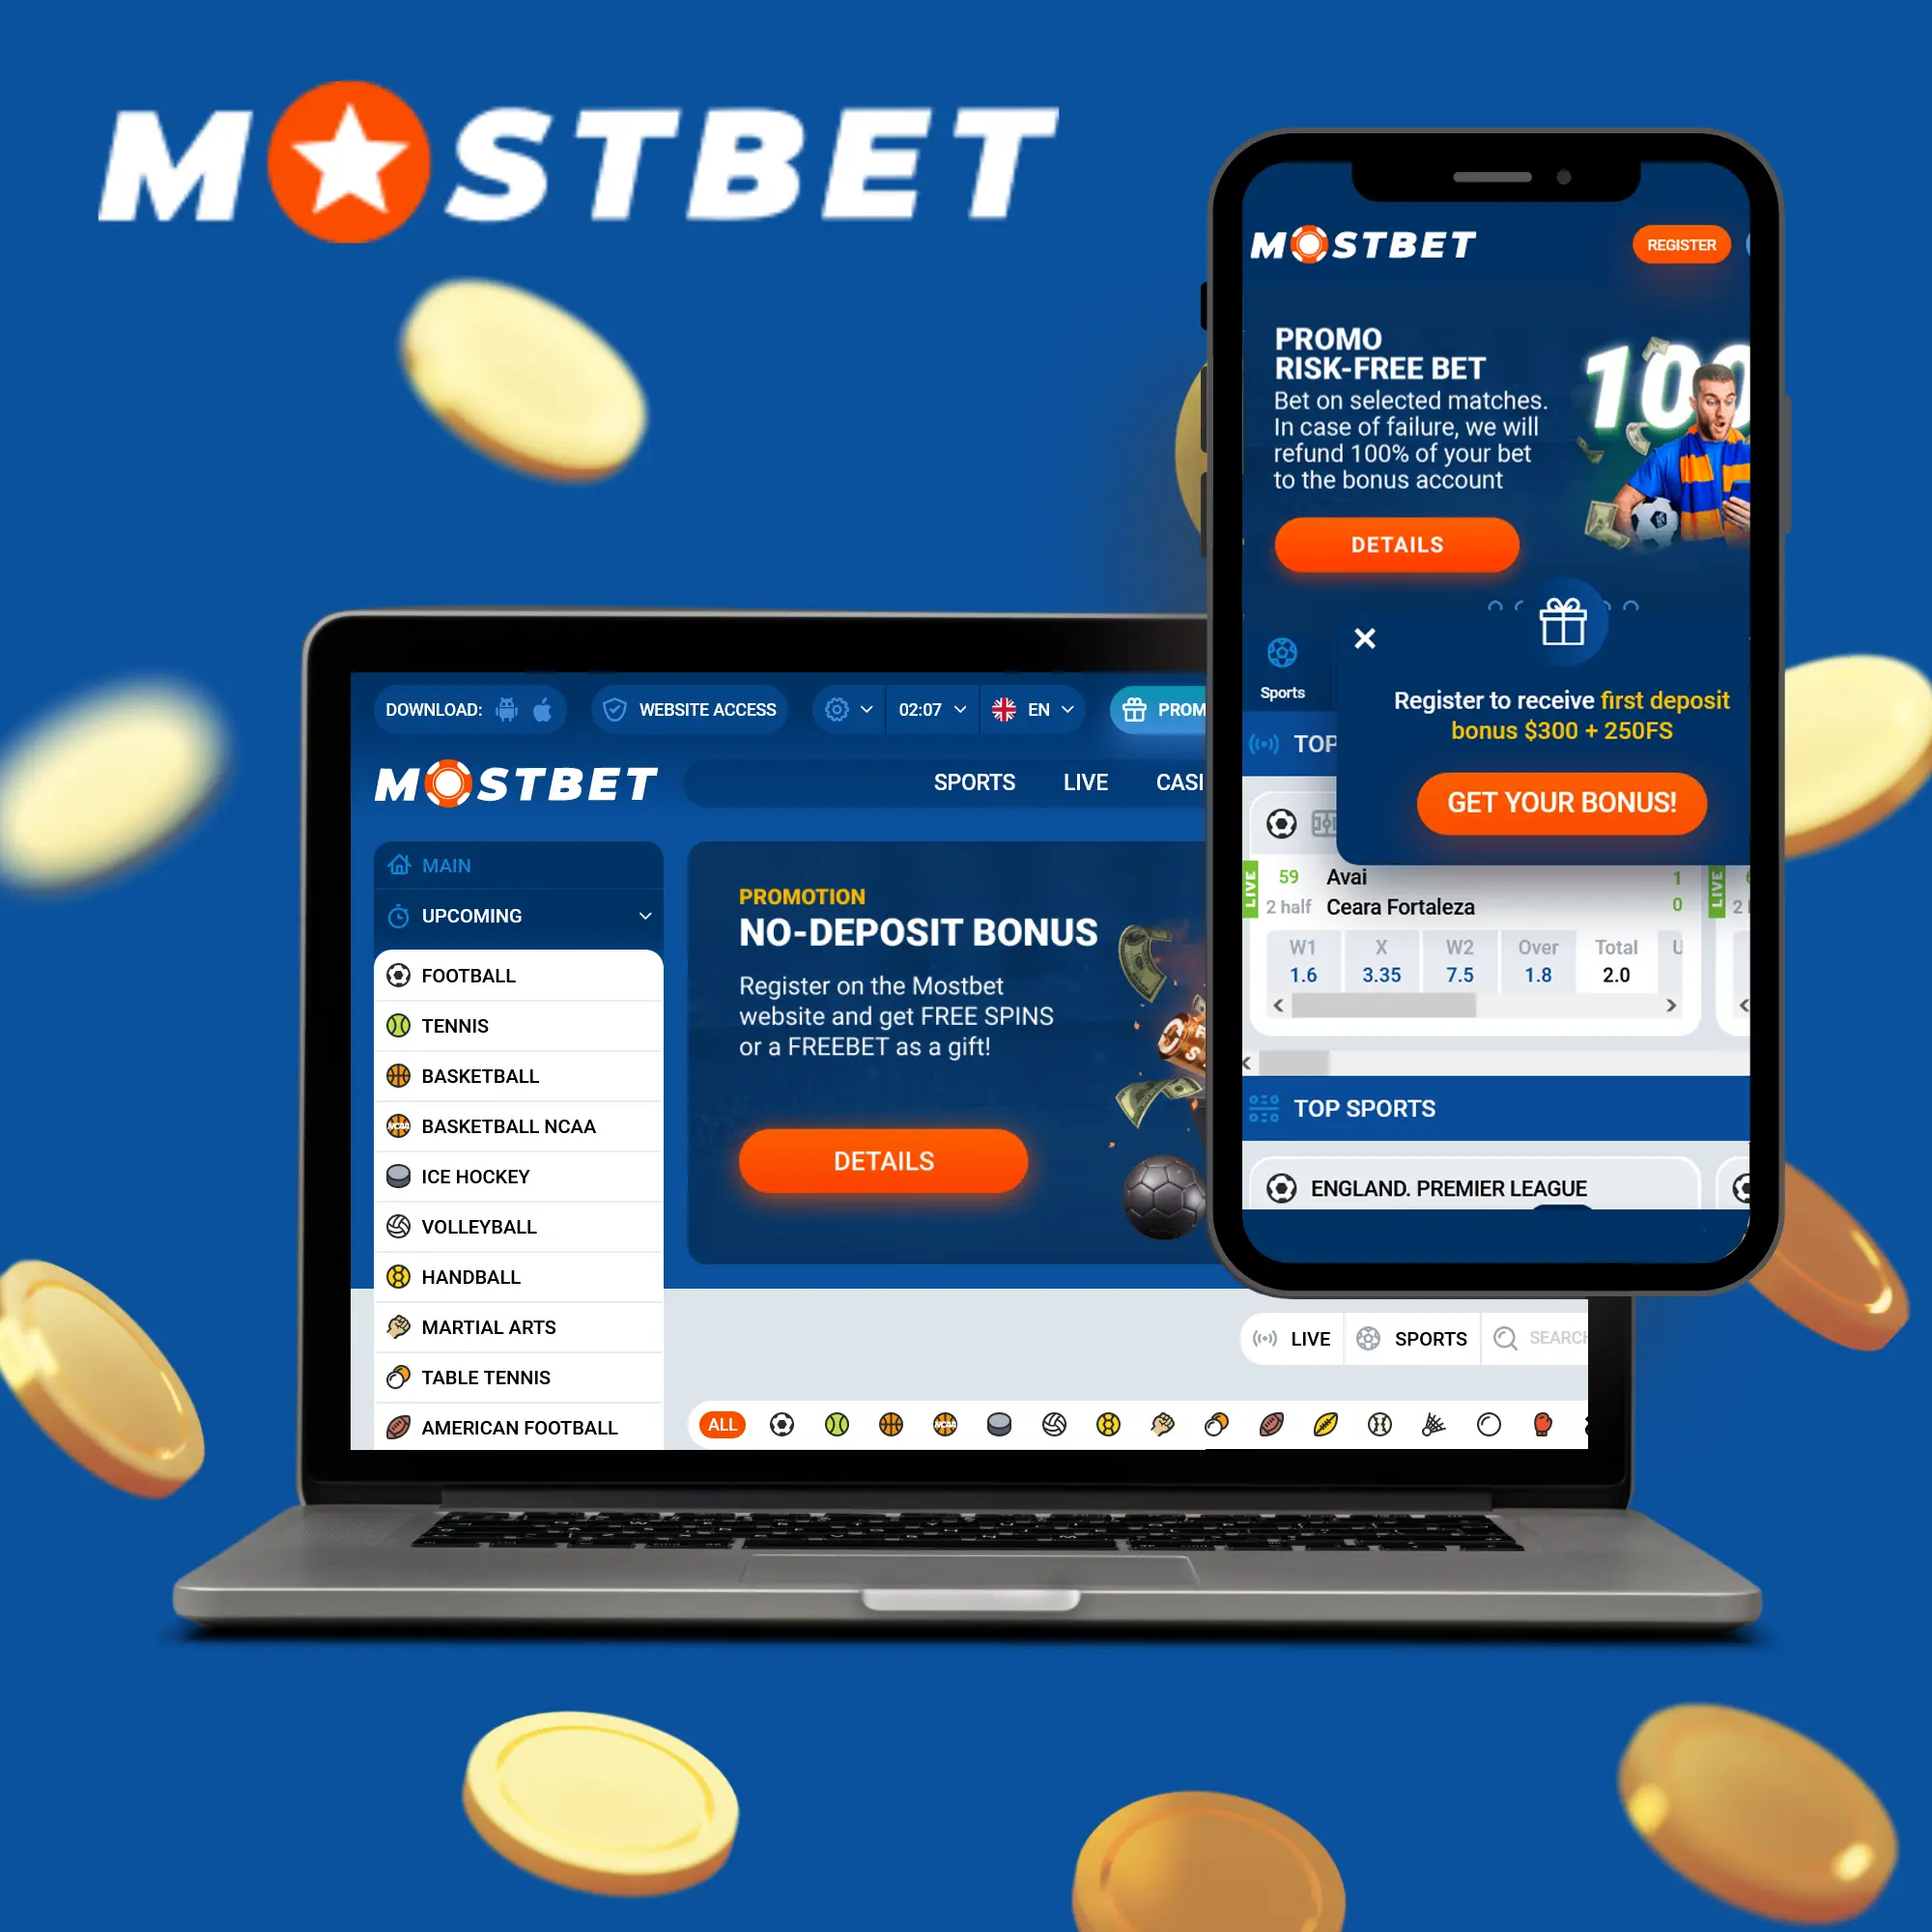 Advantages of Mostbet app and comparison with mobile version.